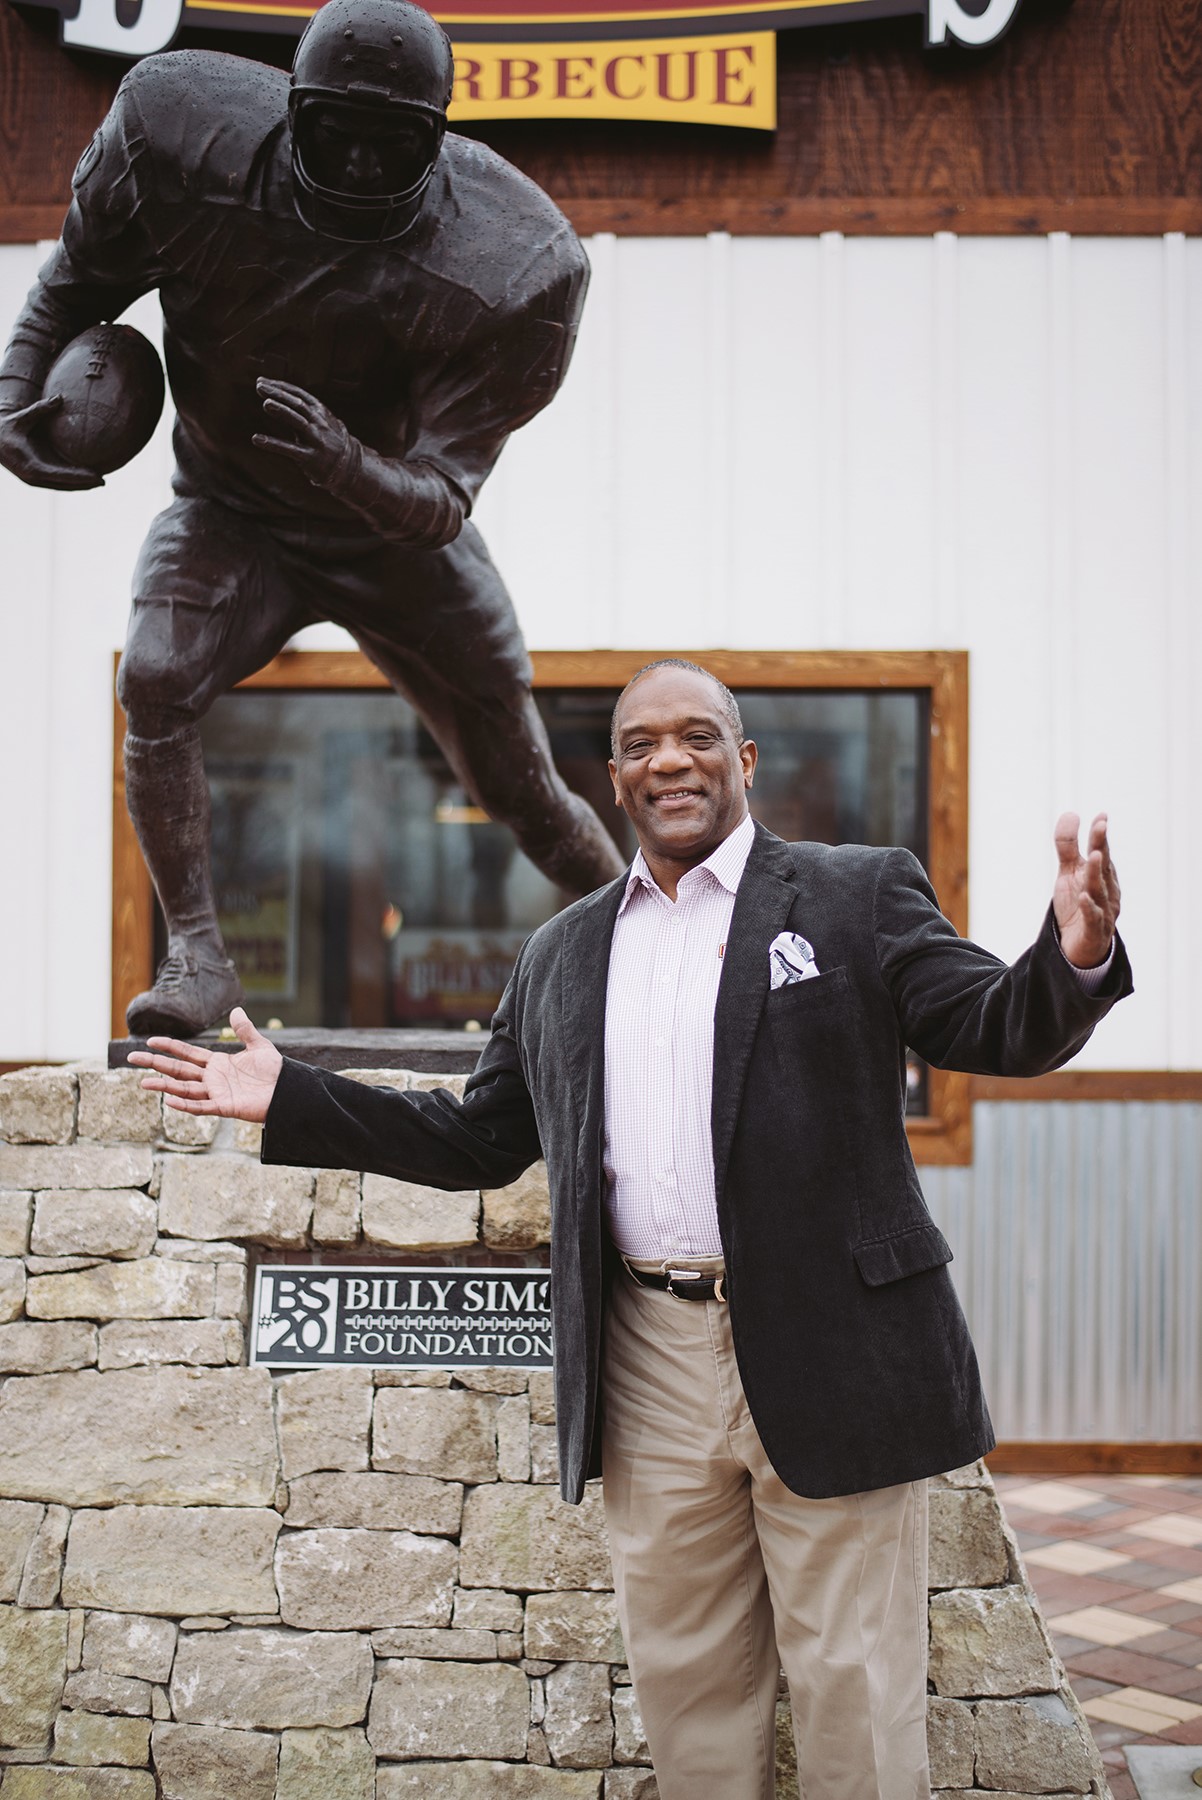 Co-founder Billy Sims, Heisman Trophy Winner and Star NFL running back